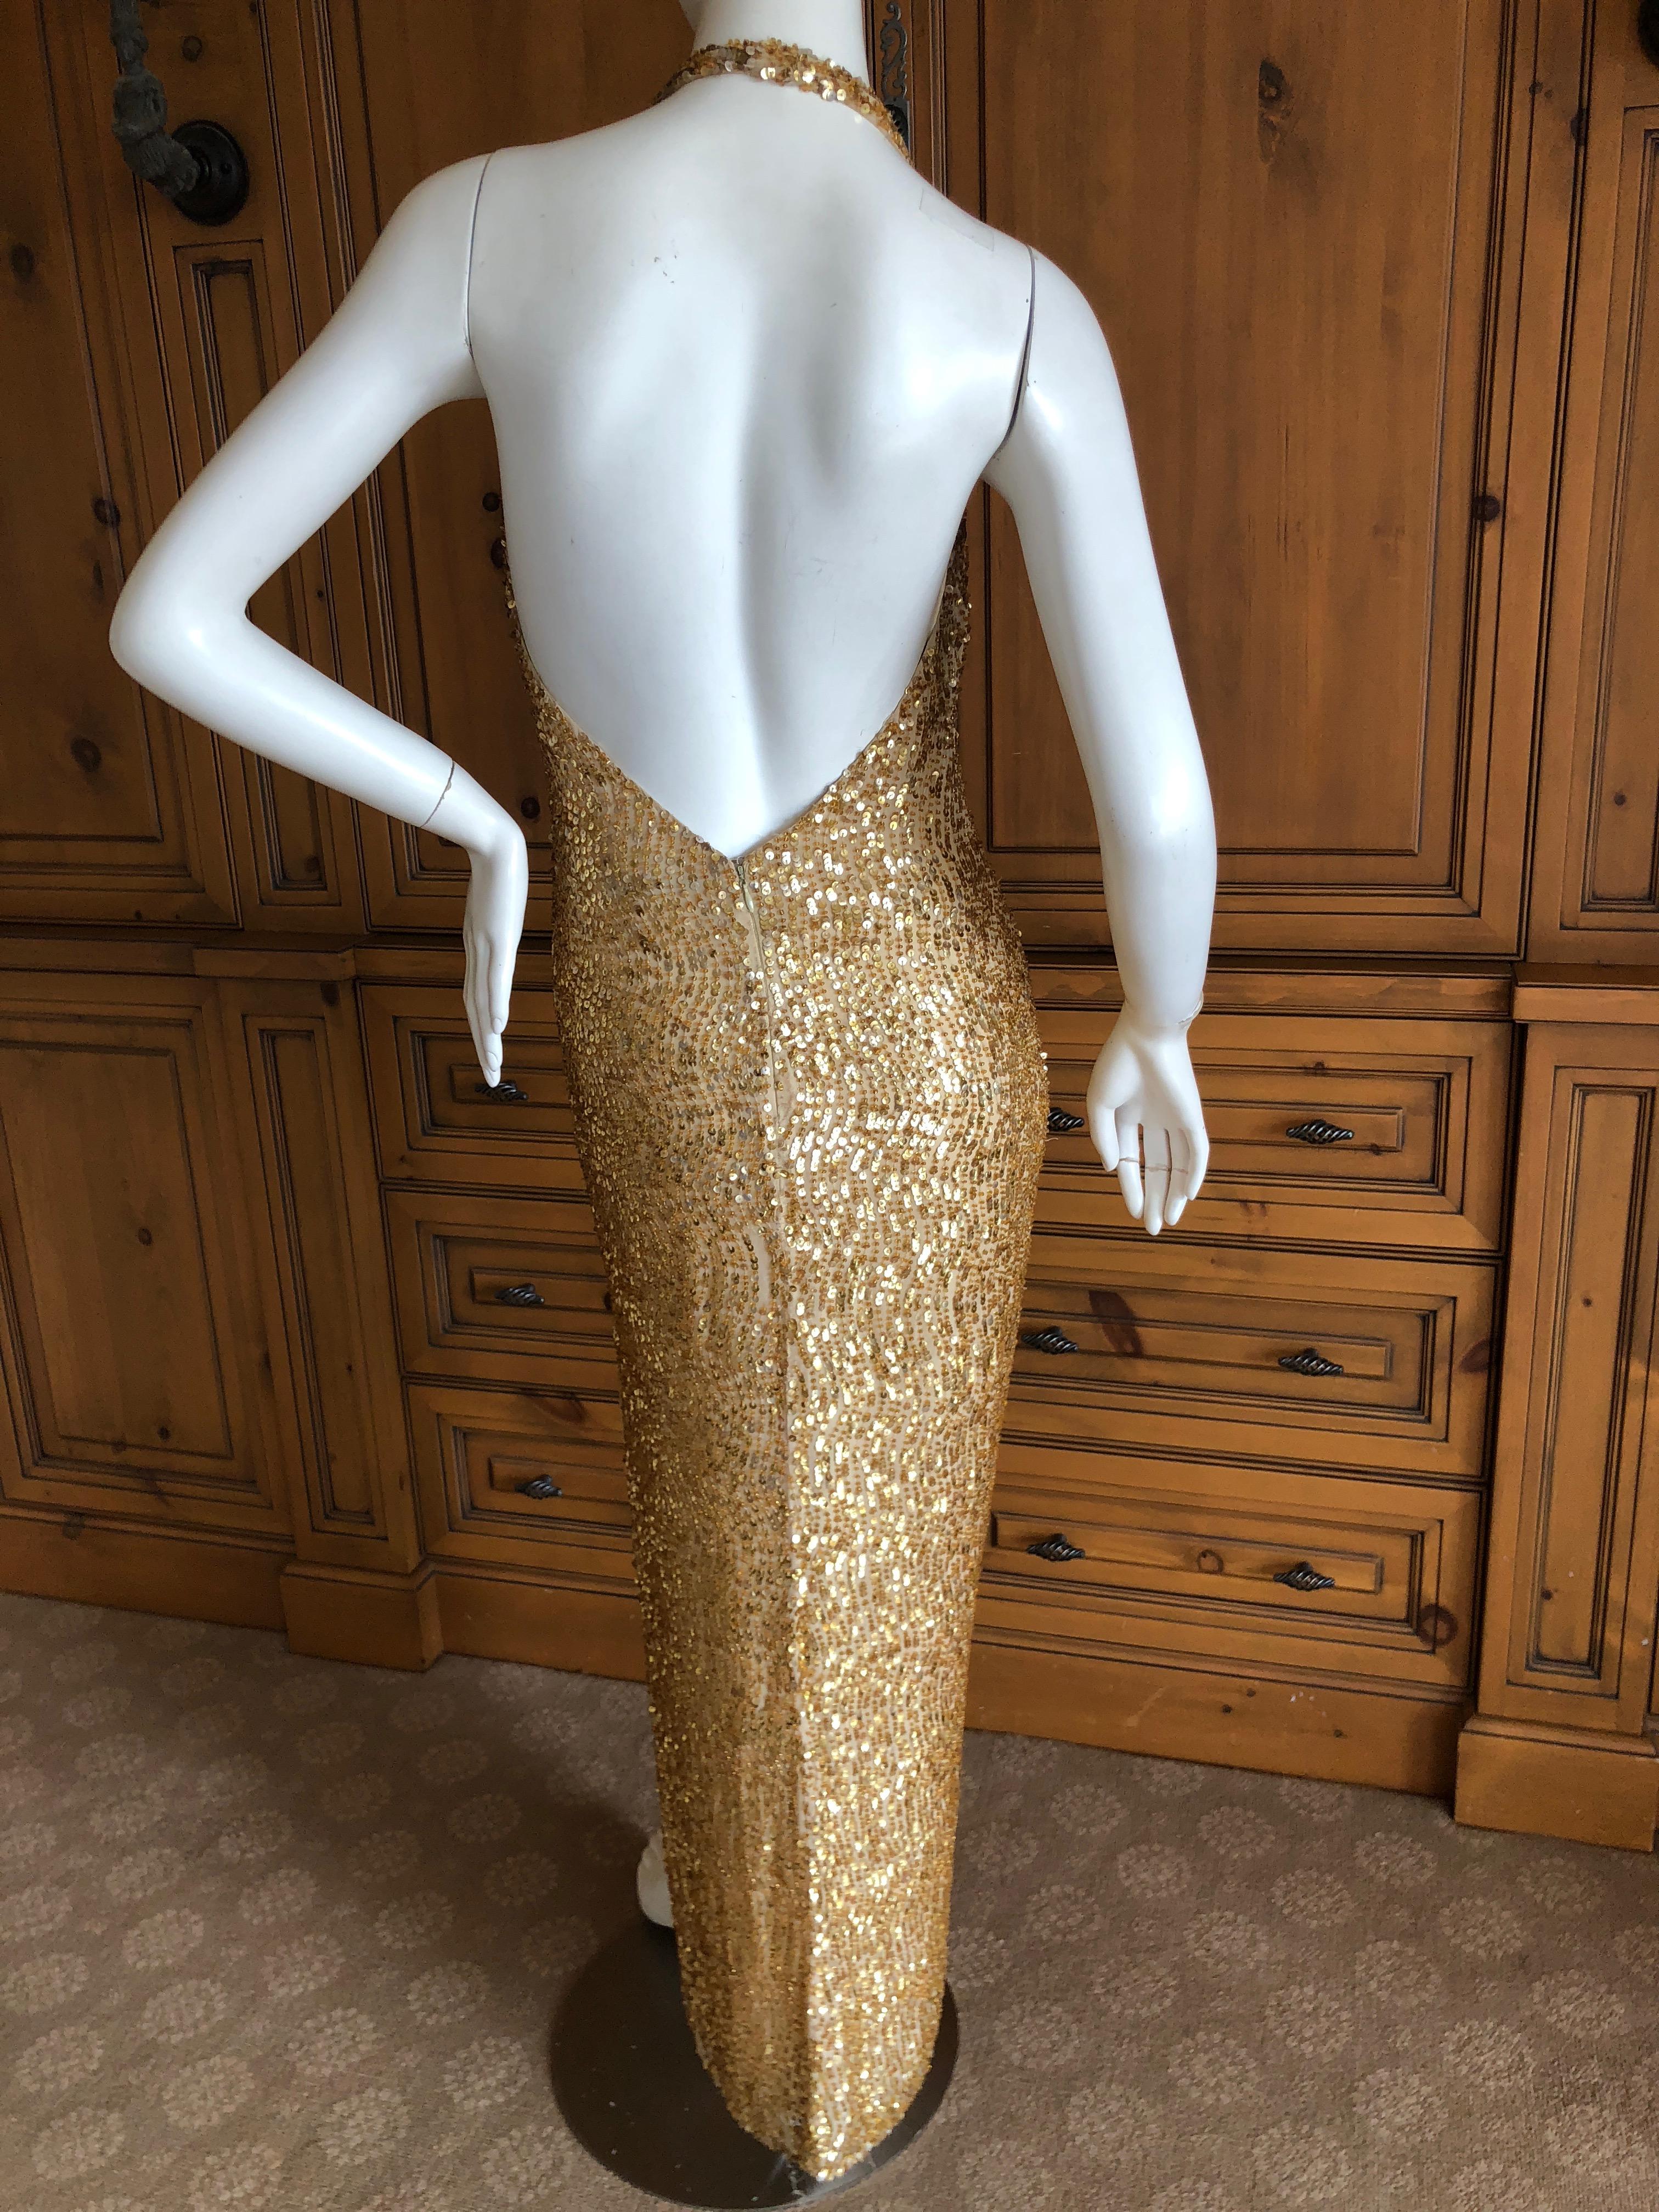 Halston by Randolph Duke 1999 Gold Sequin Halter Style Evening Gown In Fair Condition For Sale In Cloverdale, CA